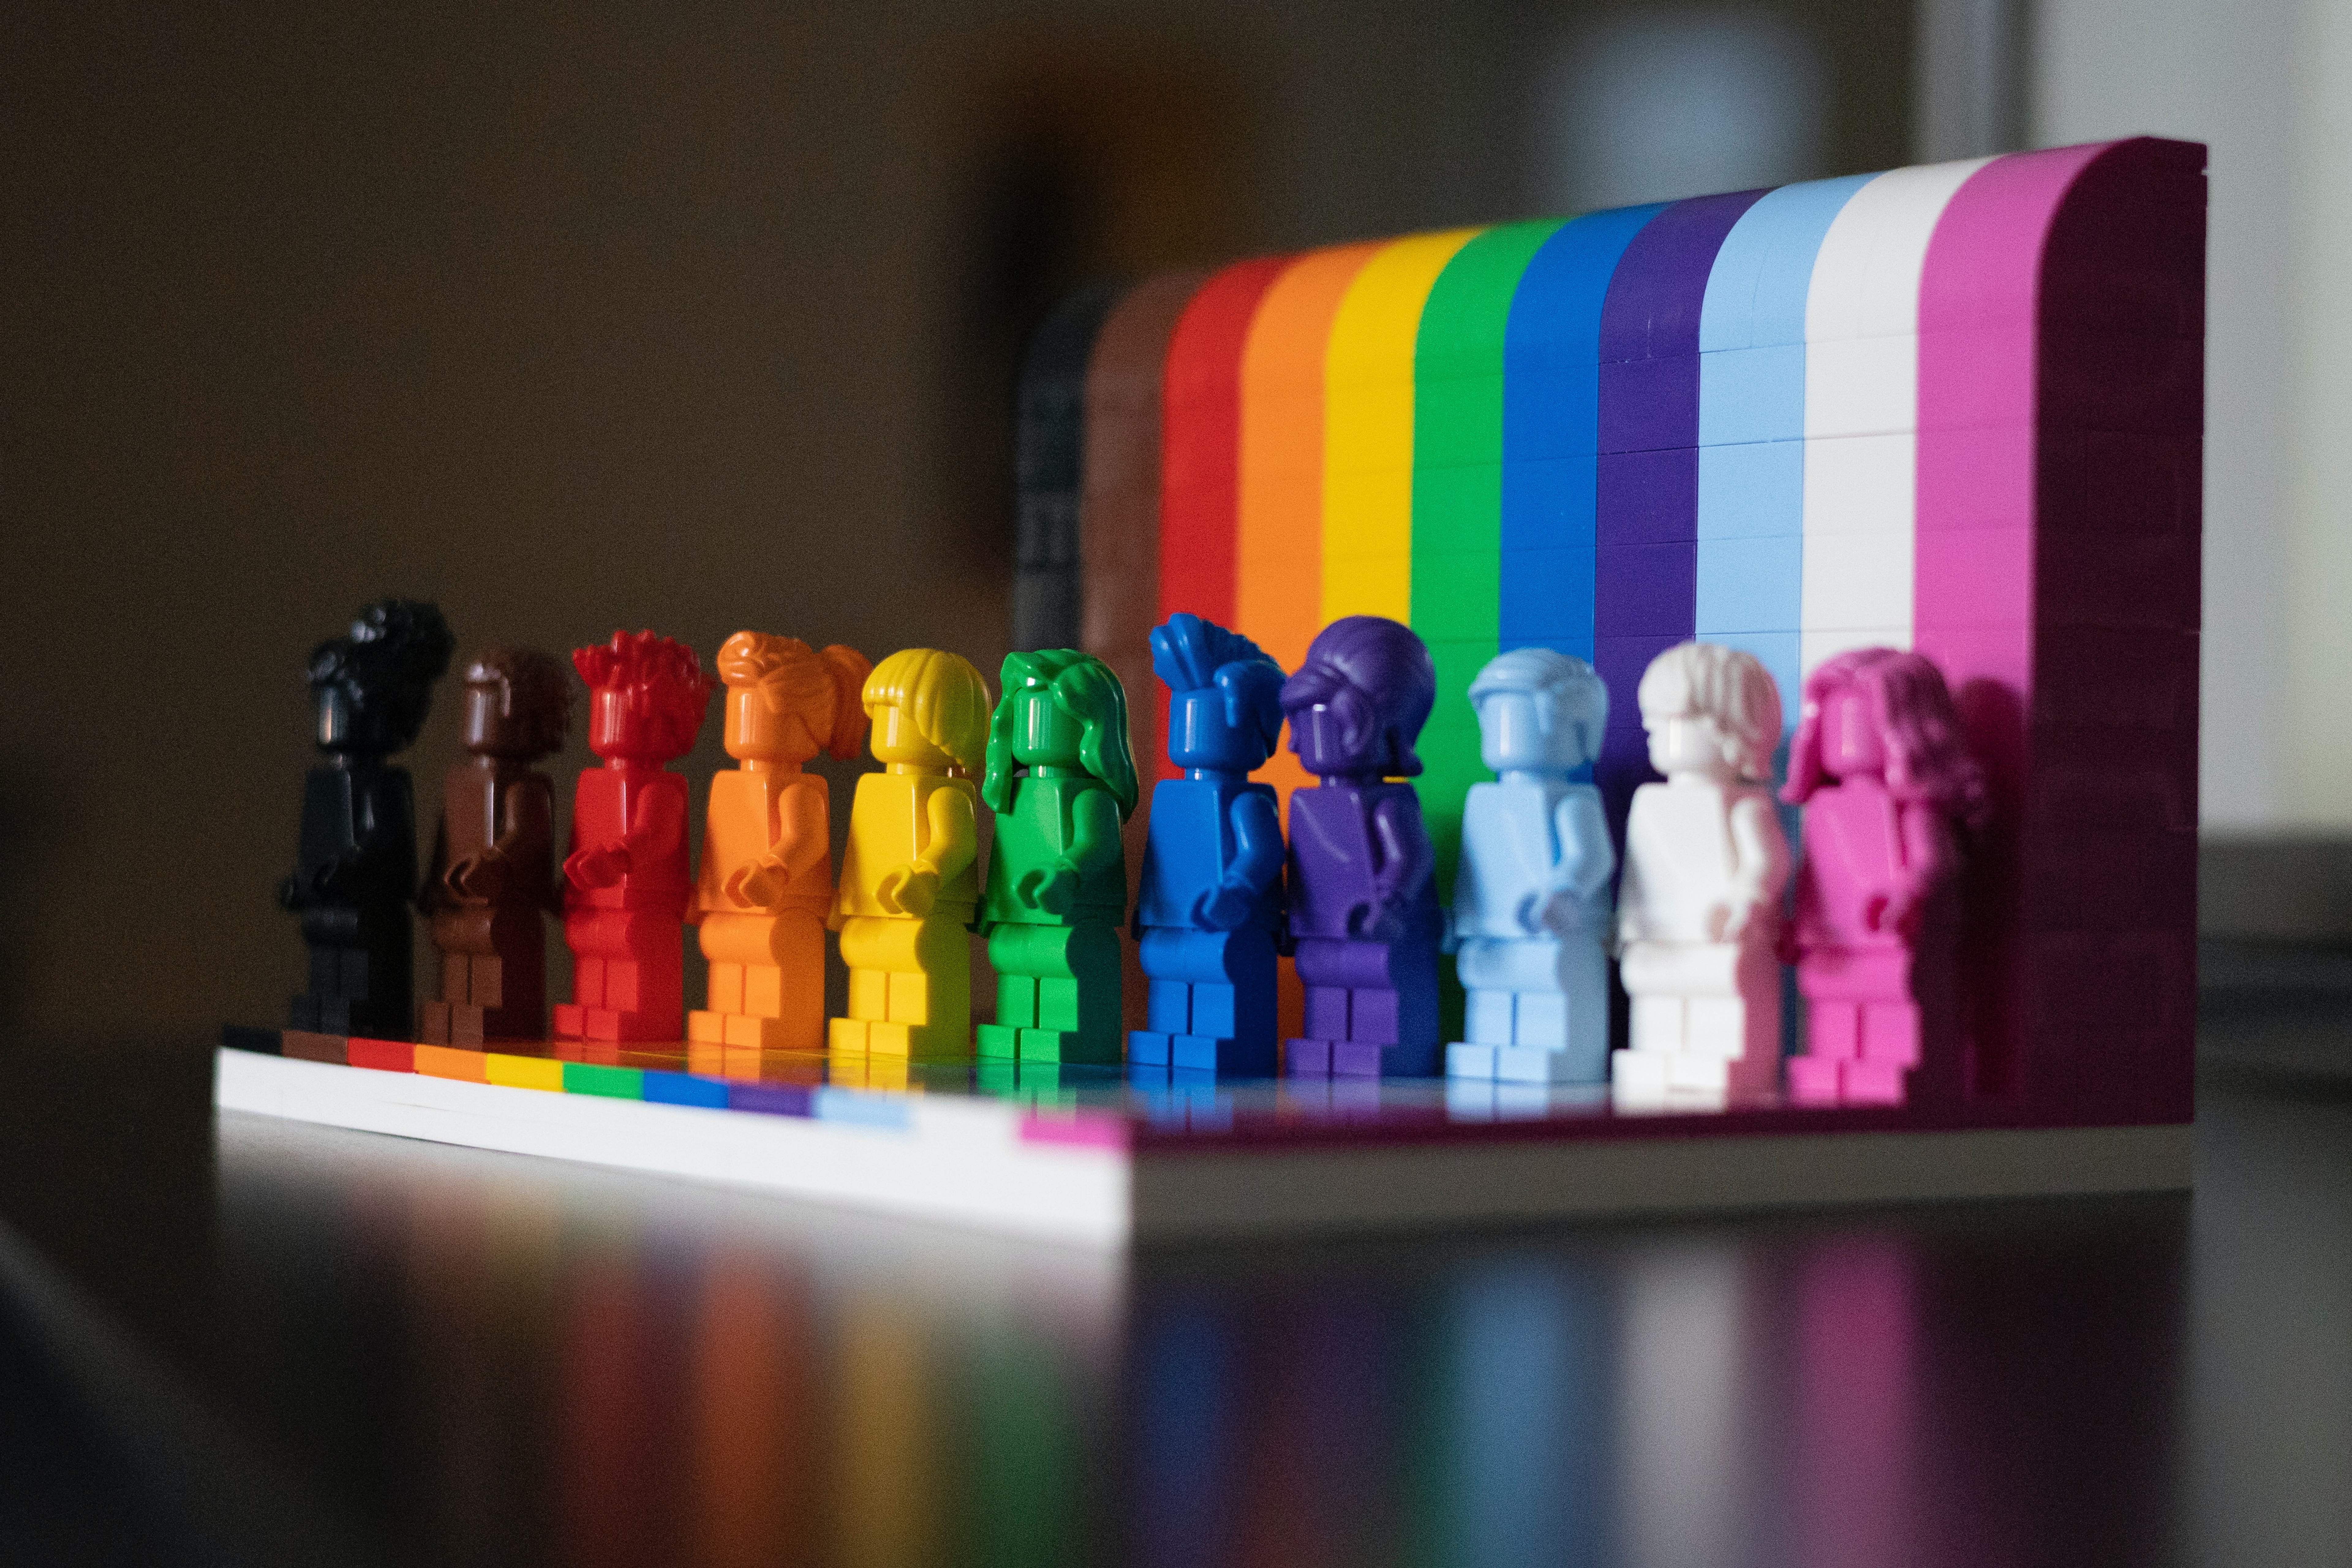 Lego "Everyone is Awesome"